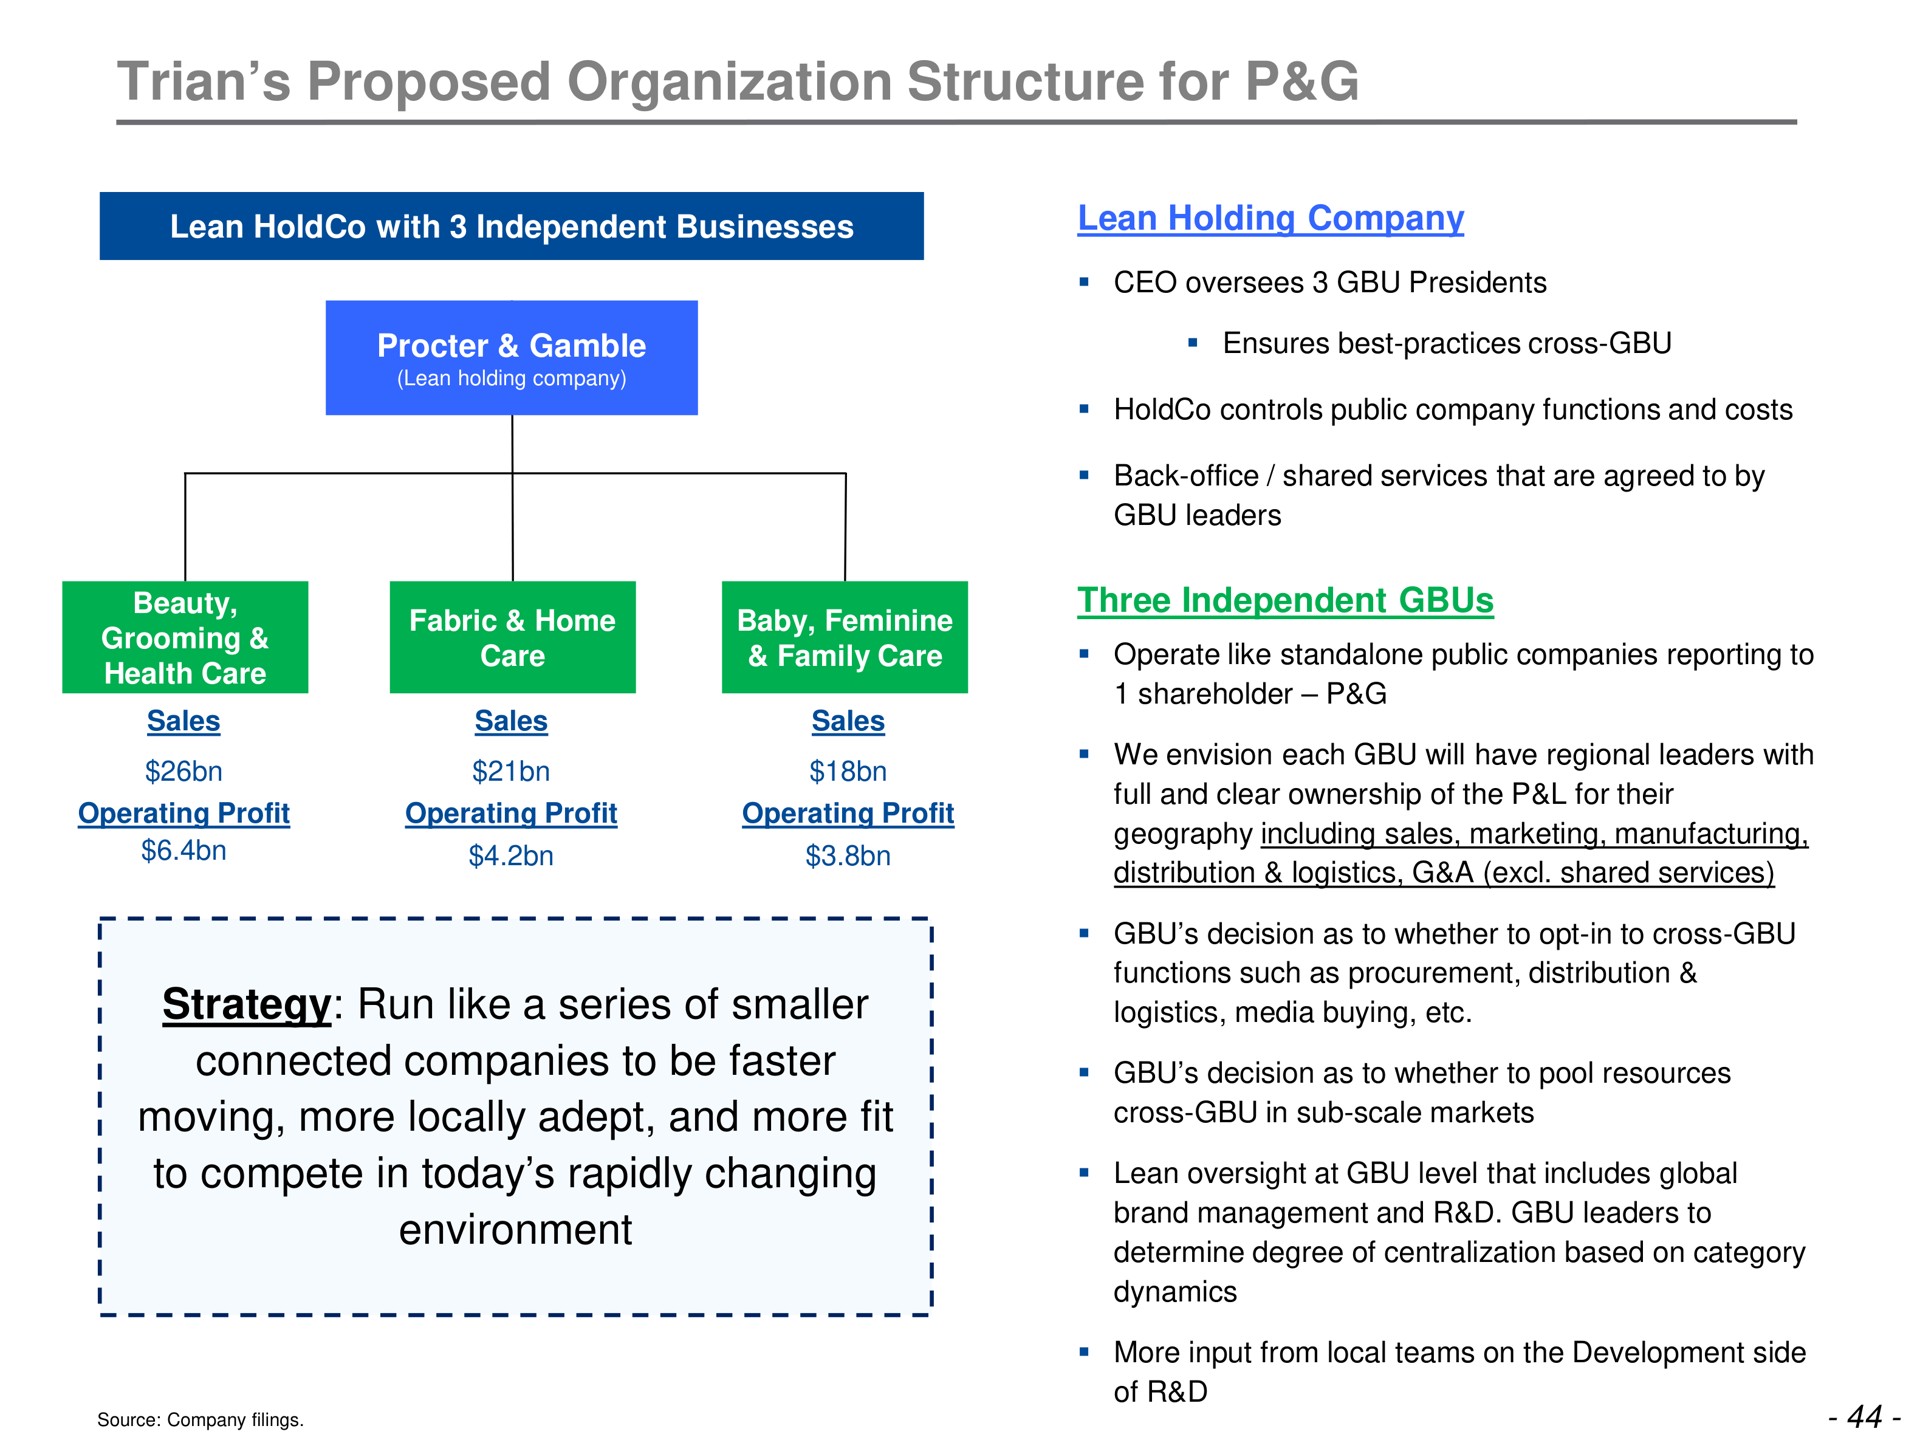 proposed organization structure for strategy run like a series of smaller connected companies to be faster moving more locally adept and more fit to compete in today rapidly changing environment | Trian Partners